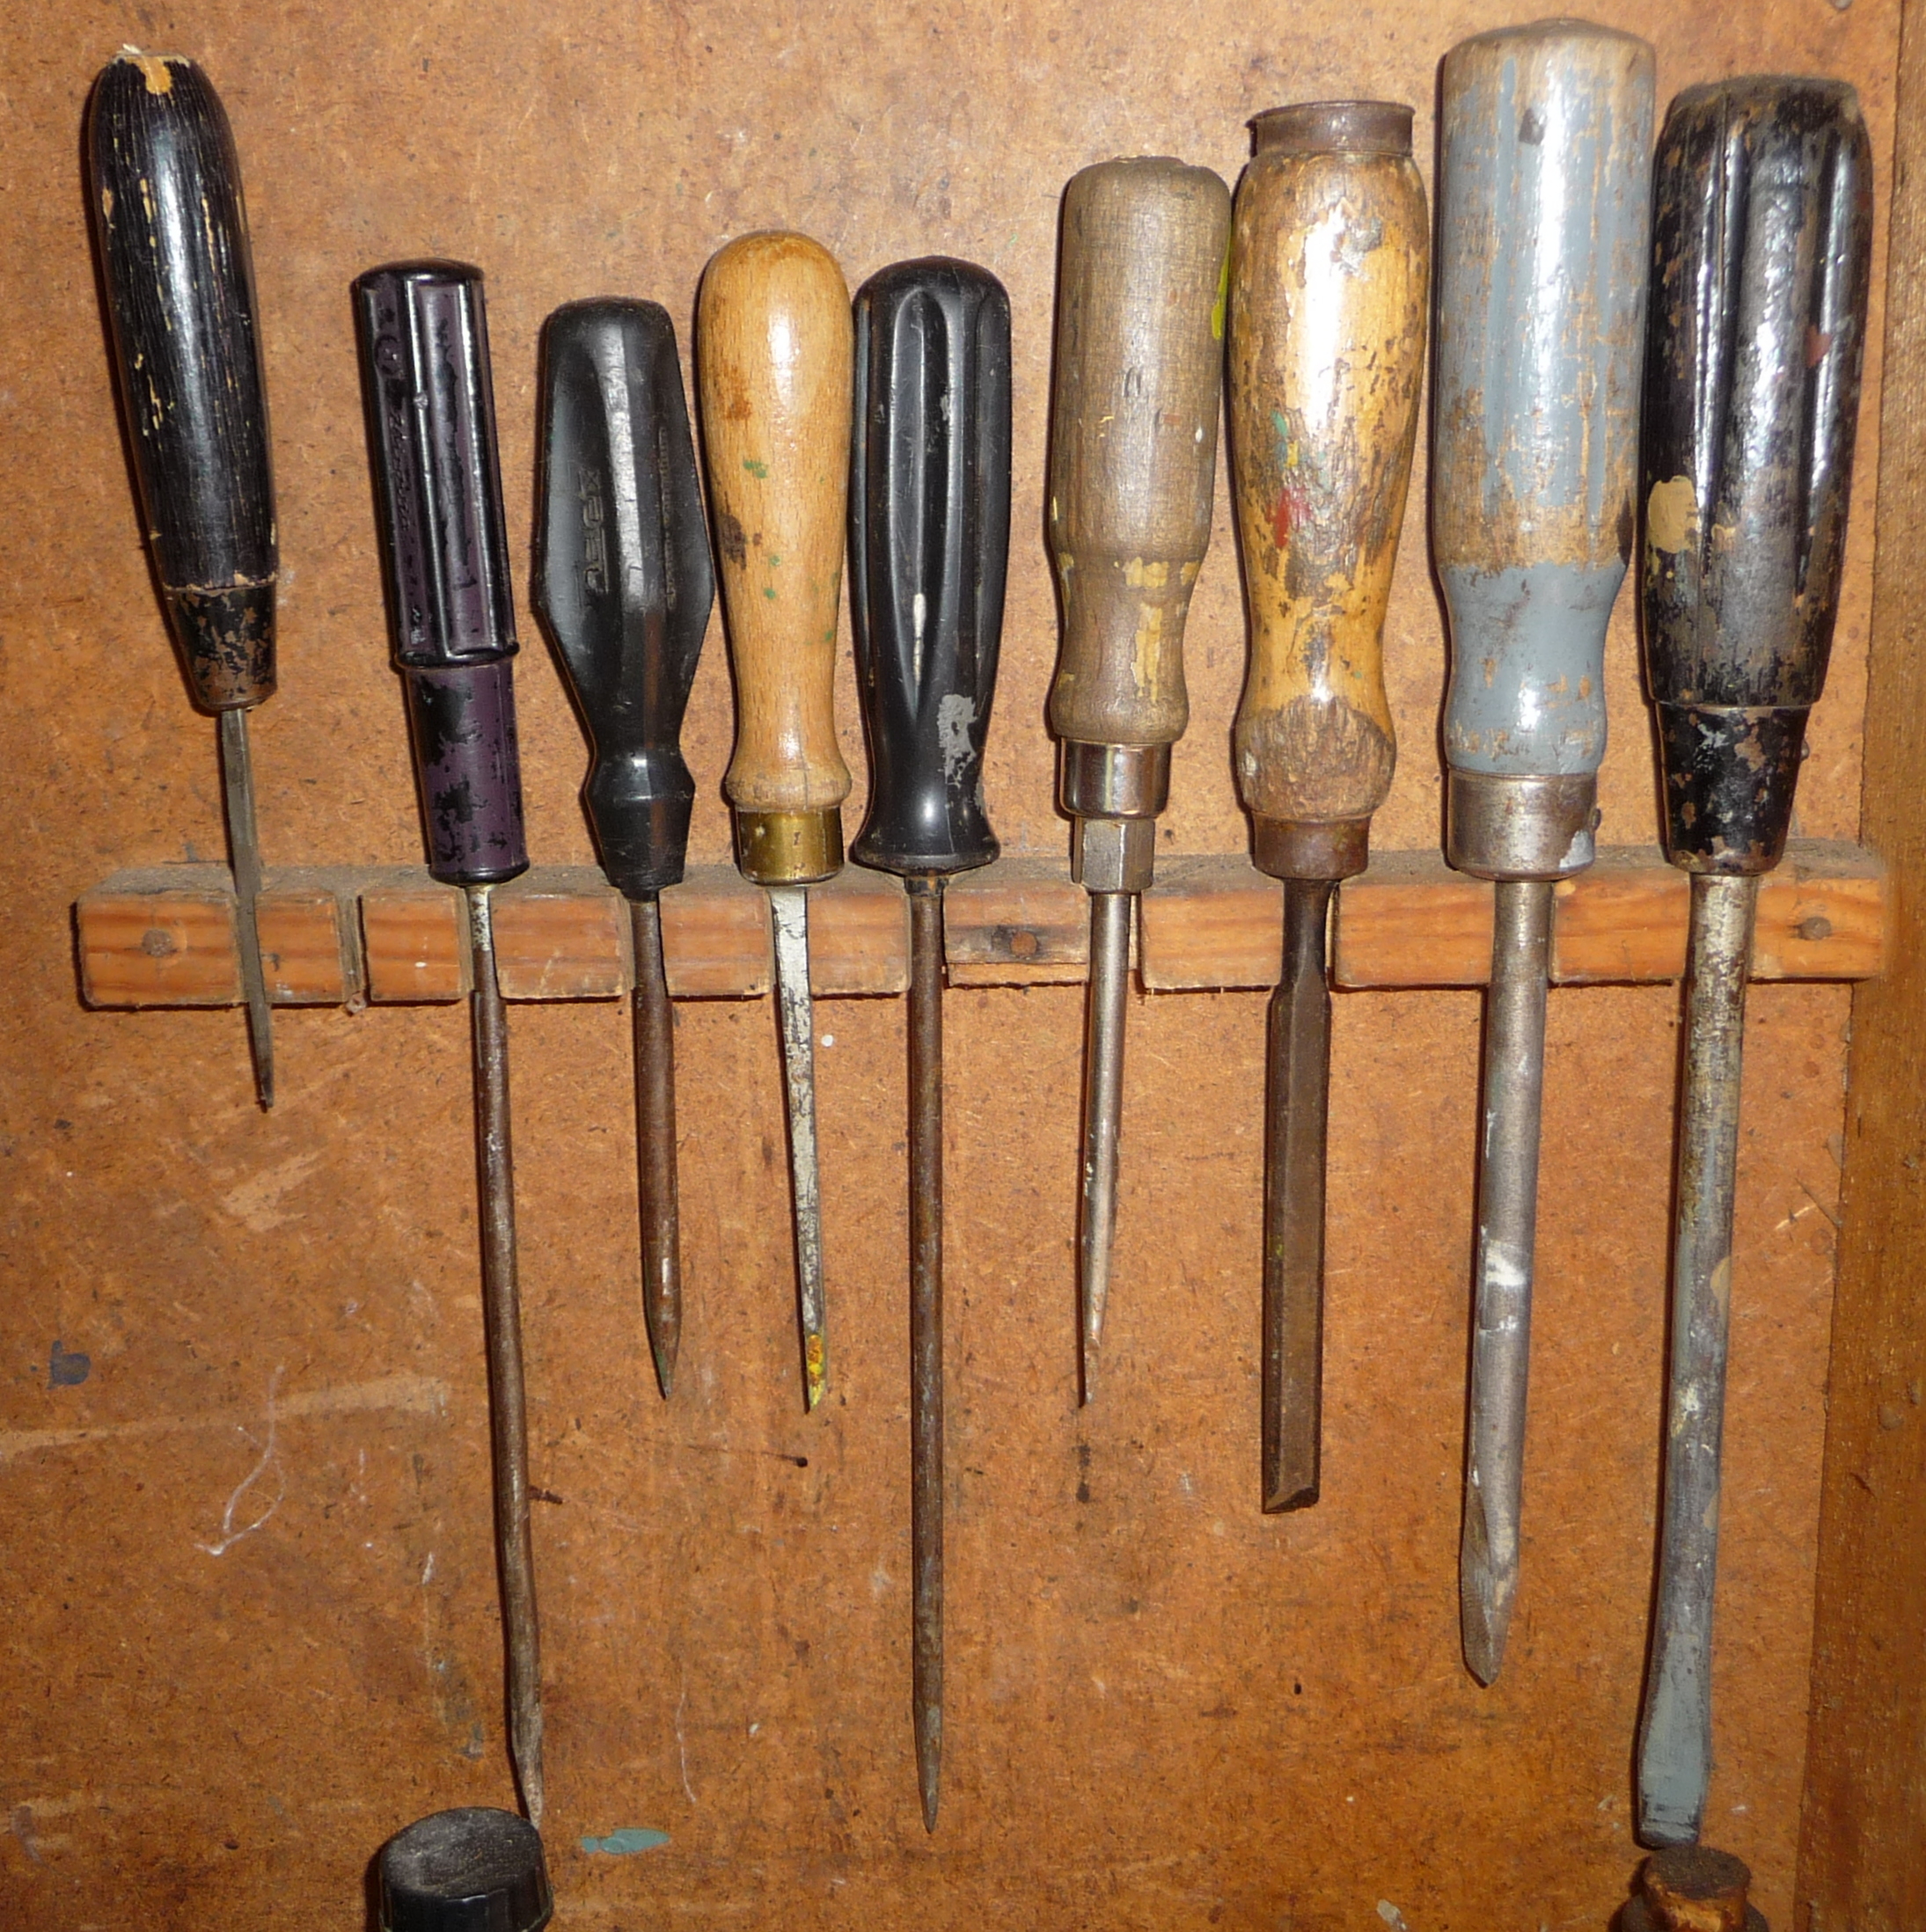 Old slotted screwdrivers